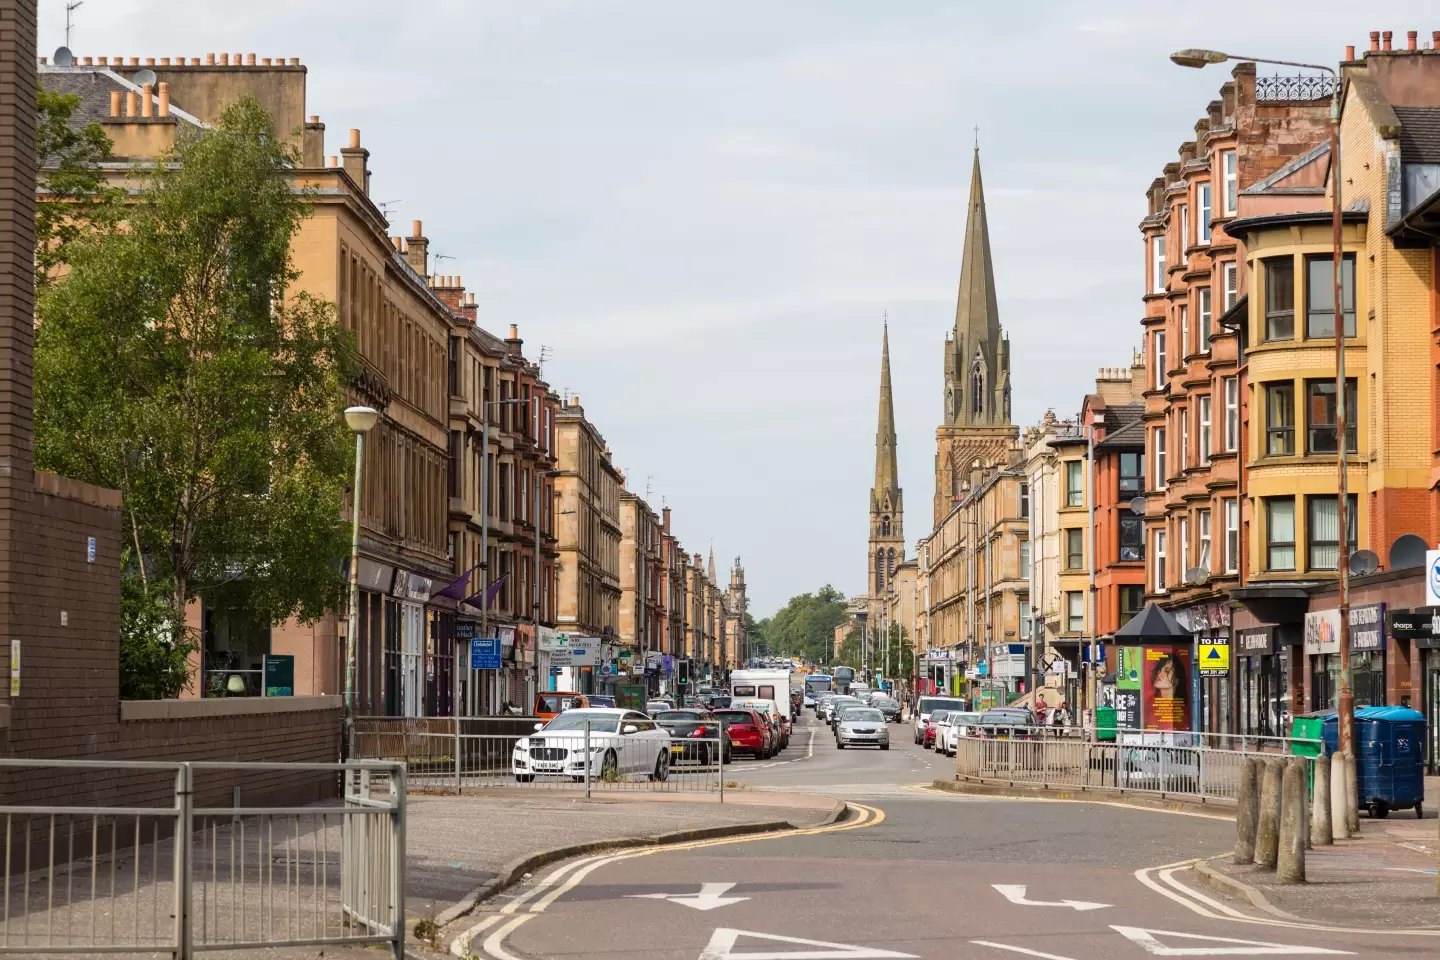 Glasgow's Great Western Road is the third coolest street in the world.